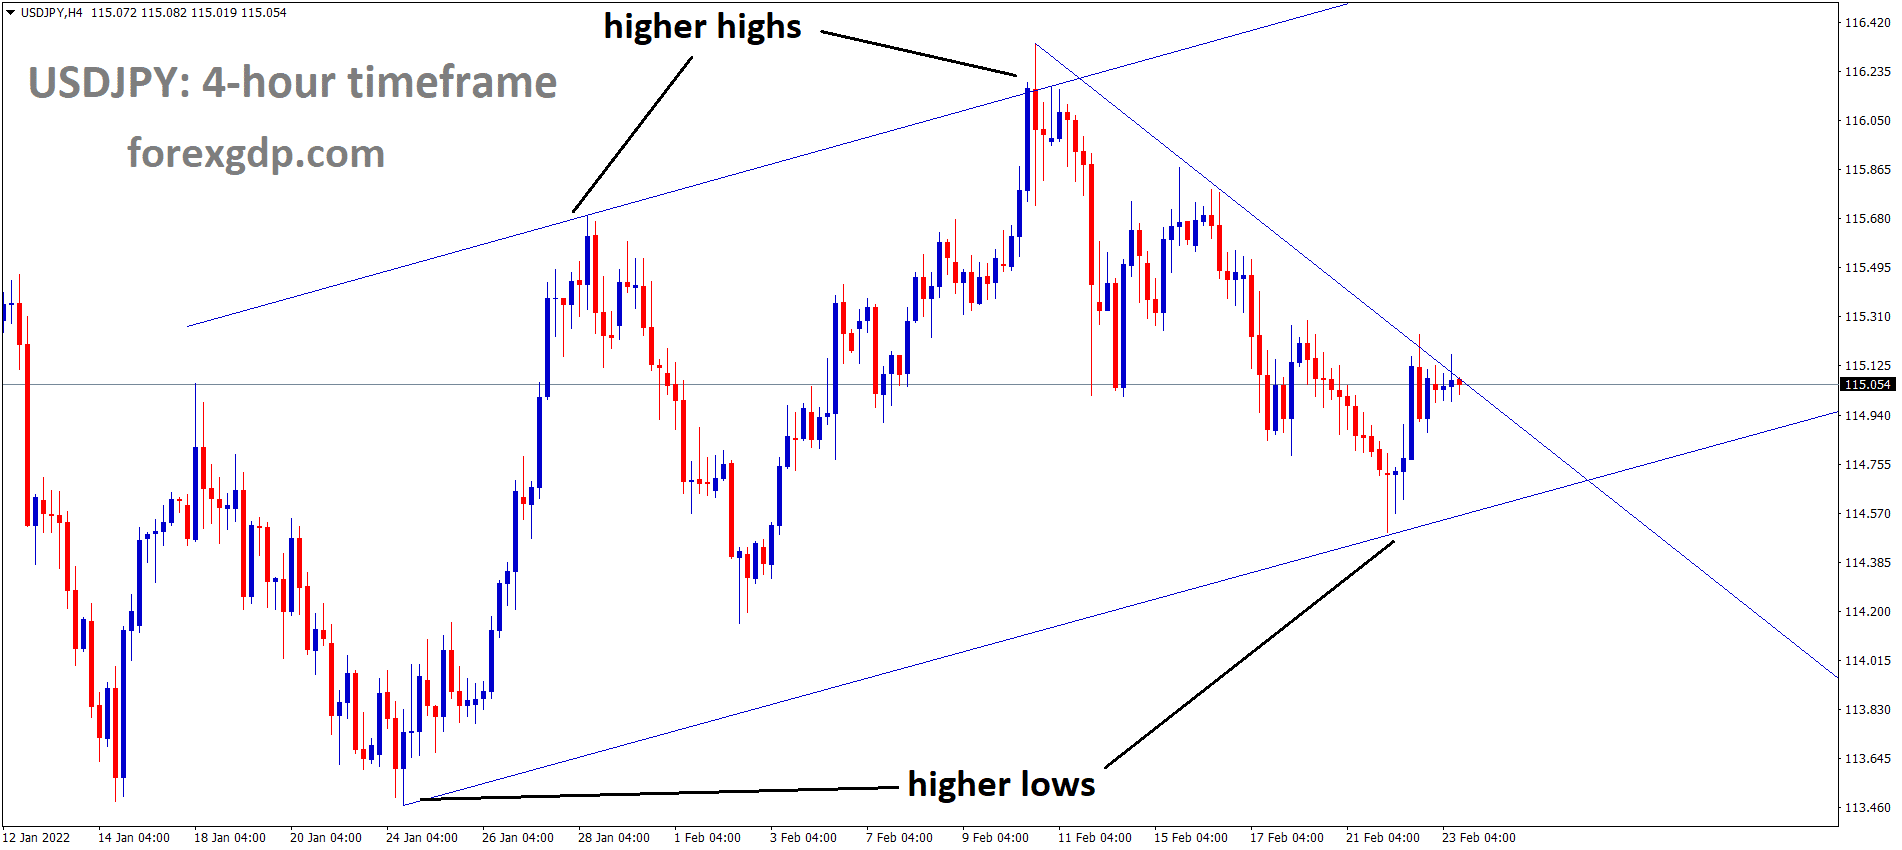 USDJPY is moving in an Ascending channel and the market has rebounded from the higher low area of the pattern and touched the Lower high area of the Descending trend line.